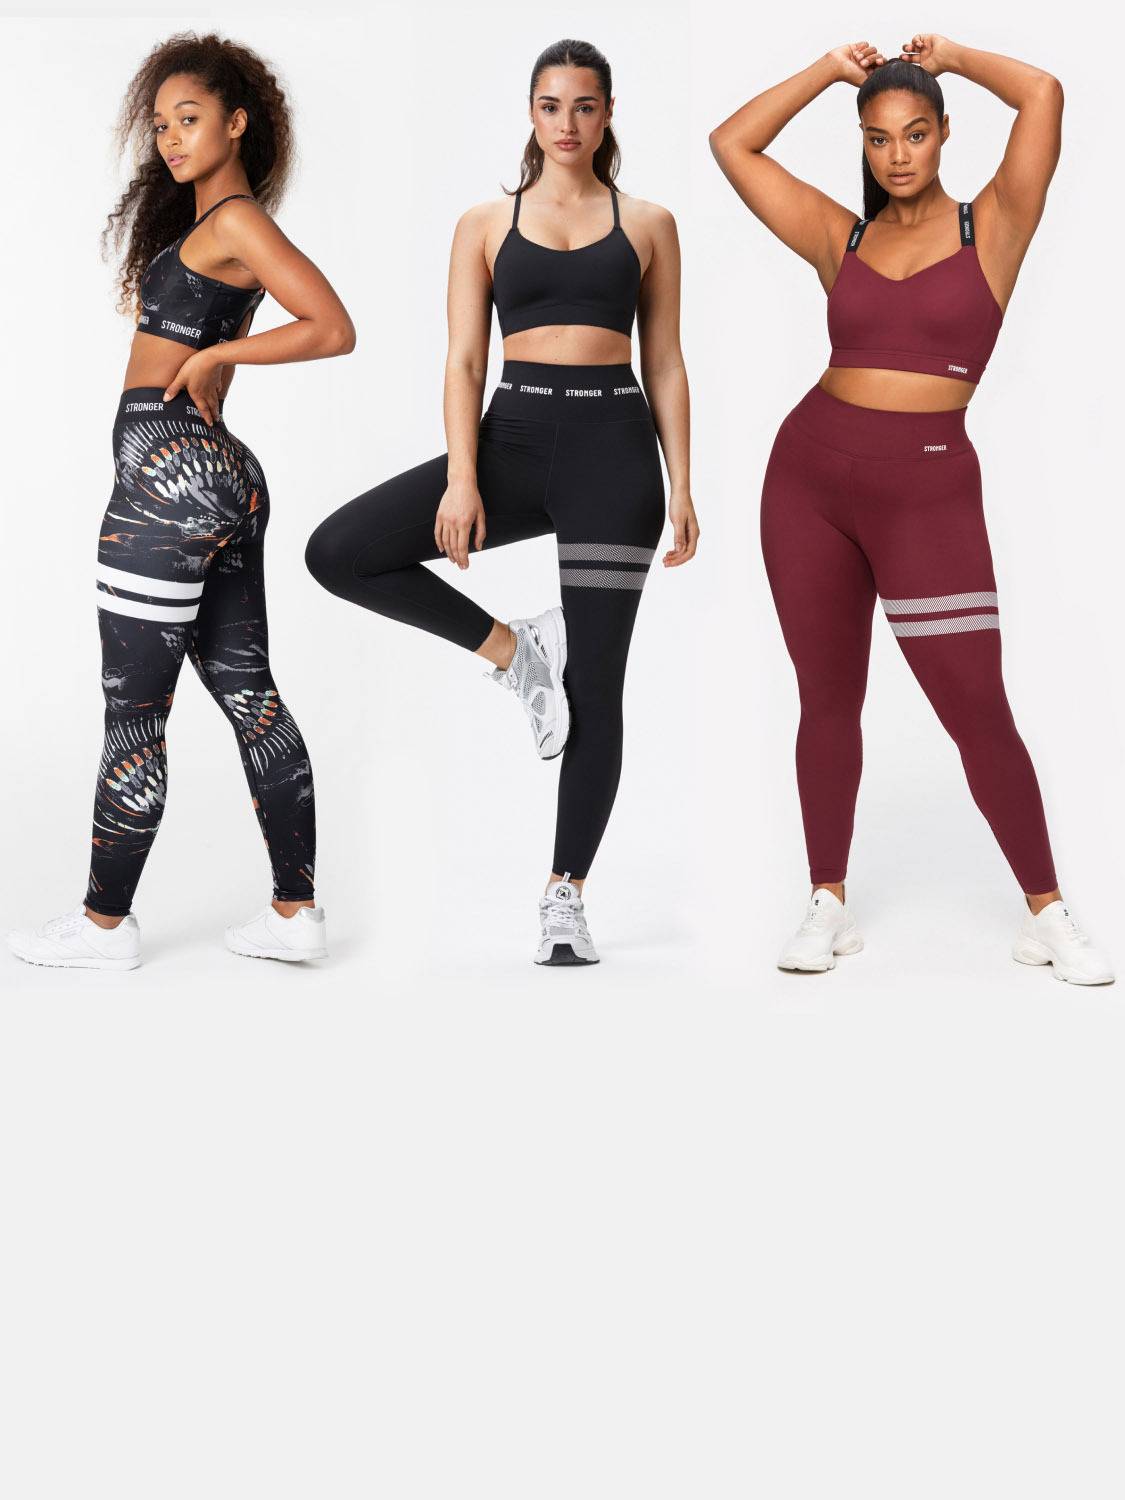  Fit ERA 2 Piece Workout Outfits - Women's Yoga Outfits